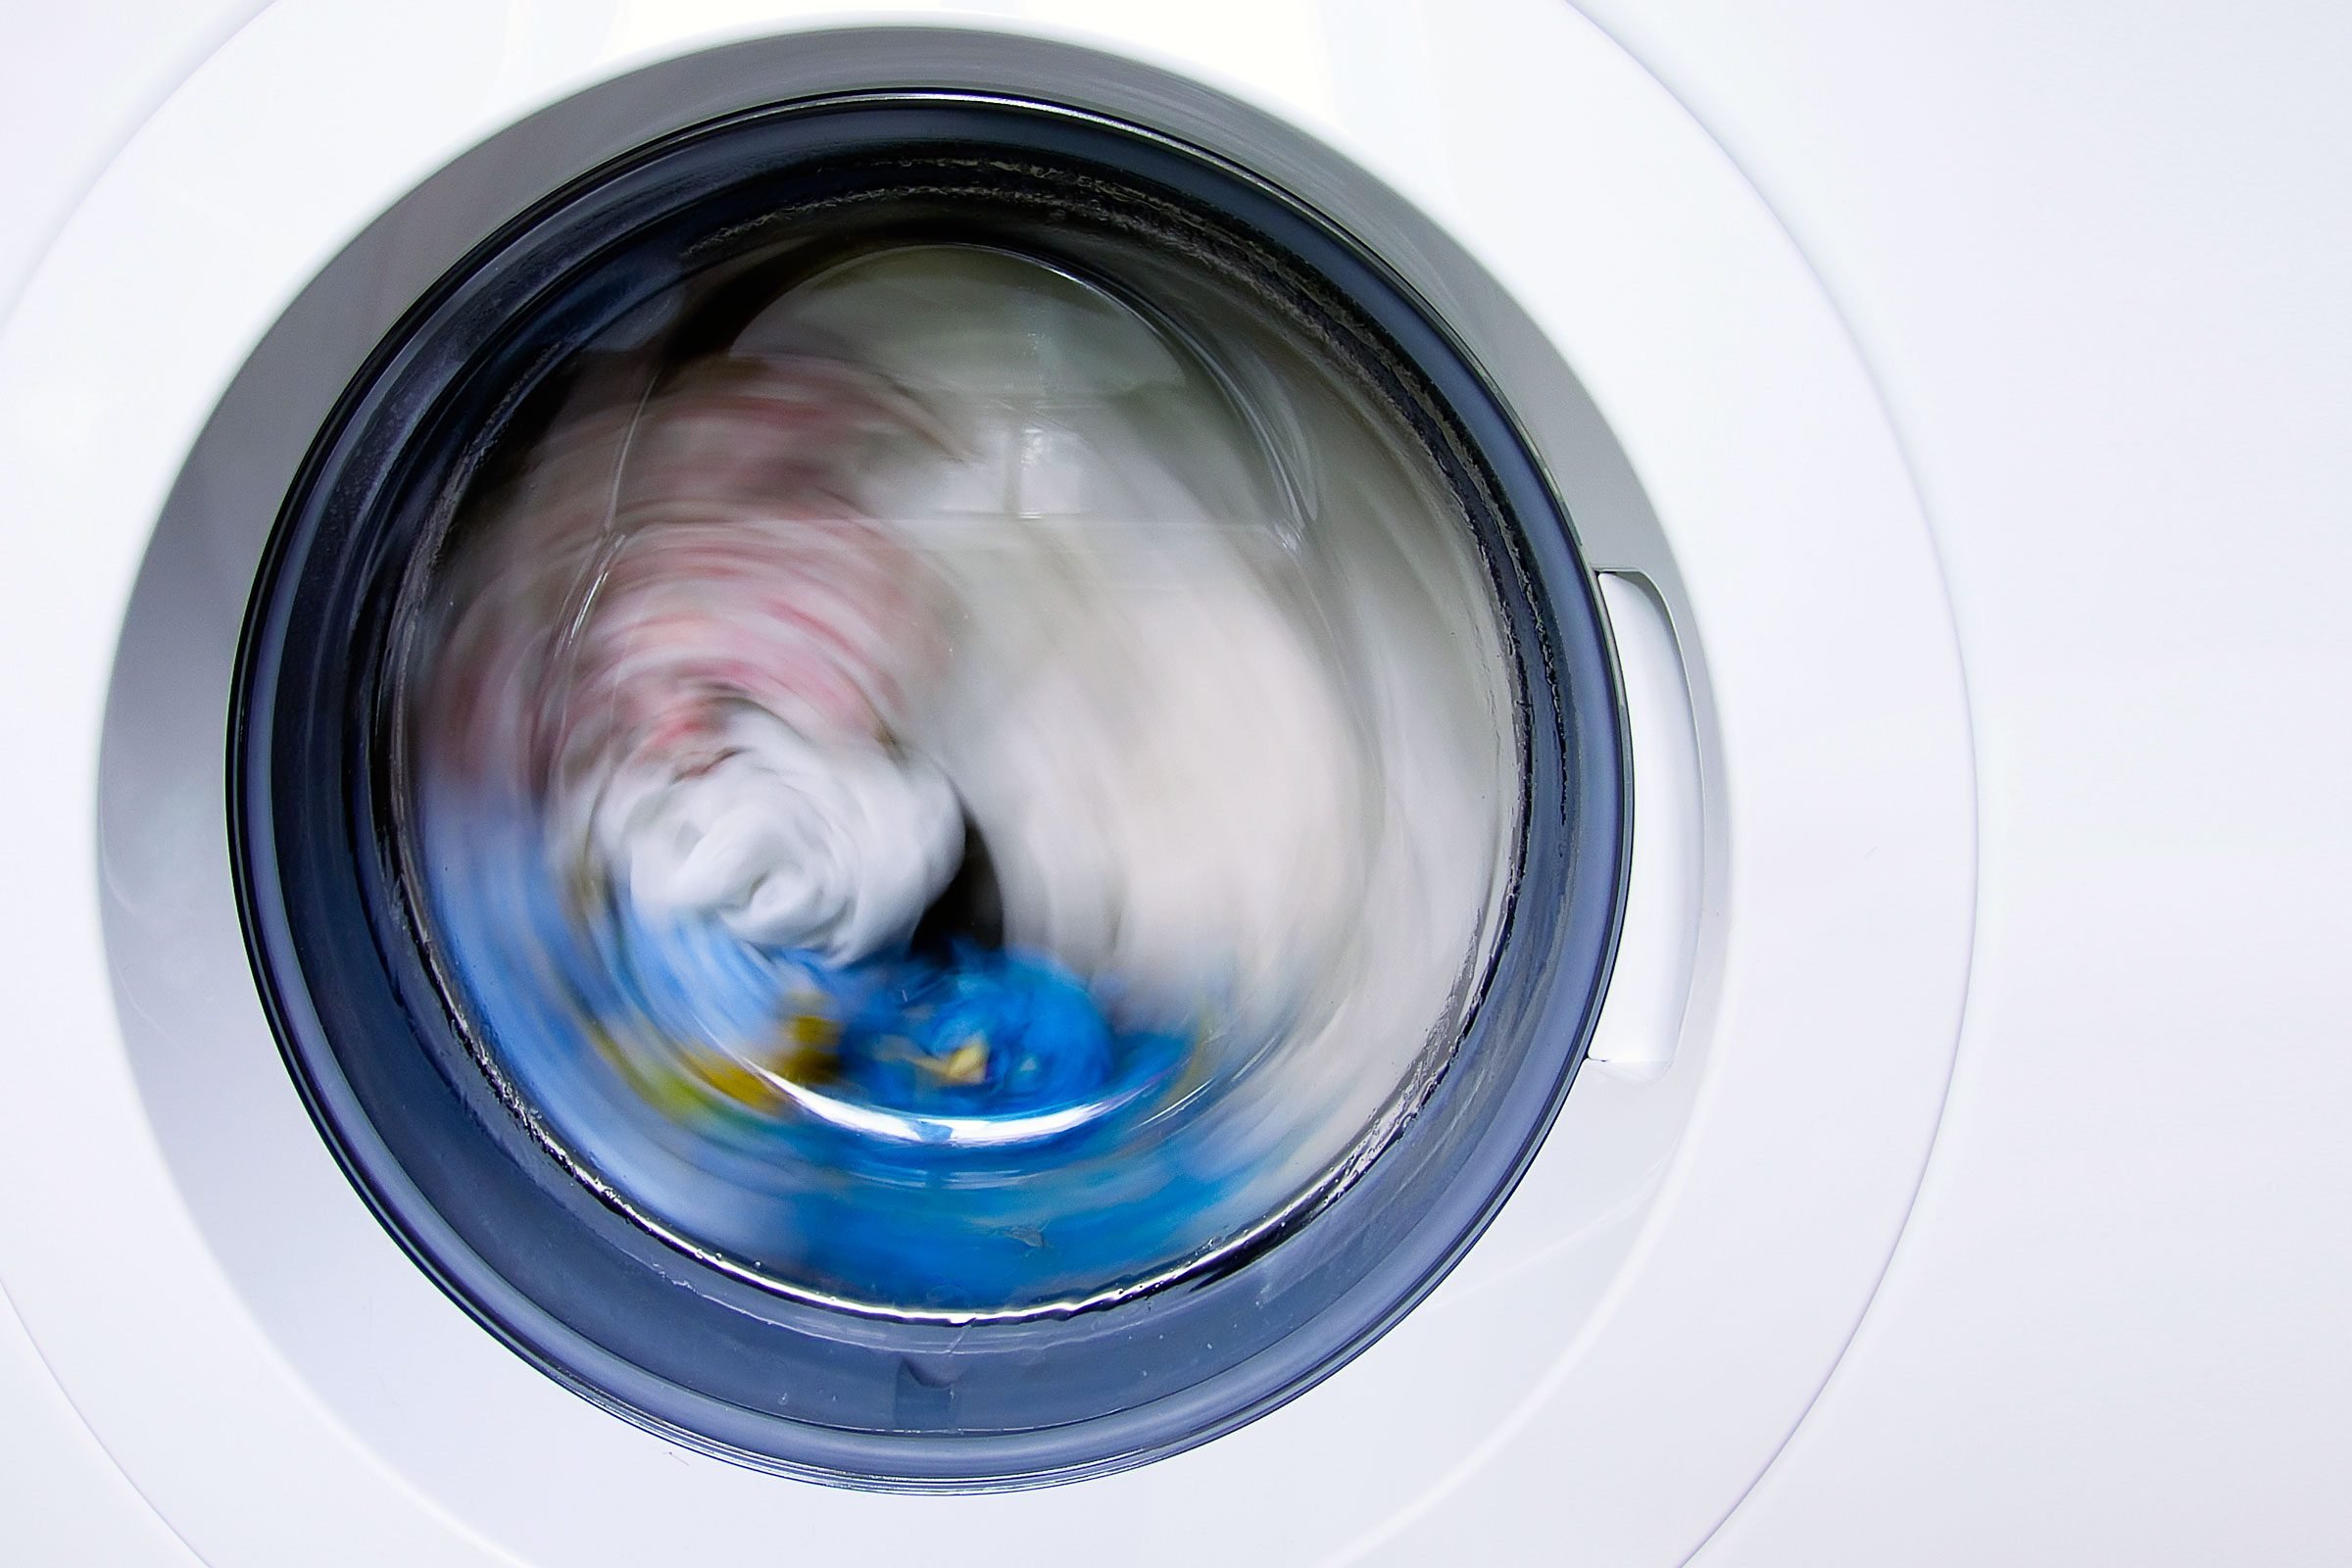 Can Smelly Washer Cleaner harm your machine?